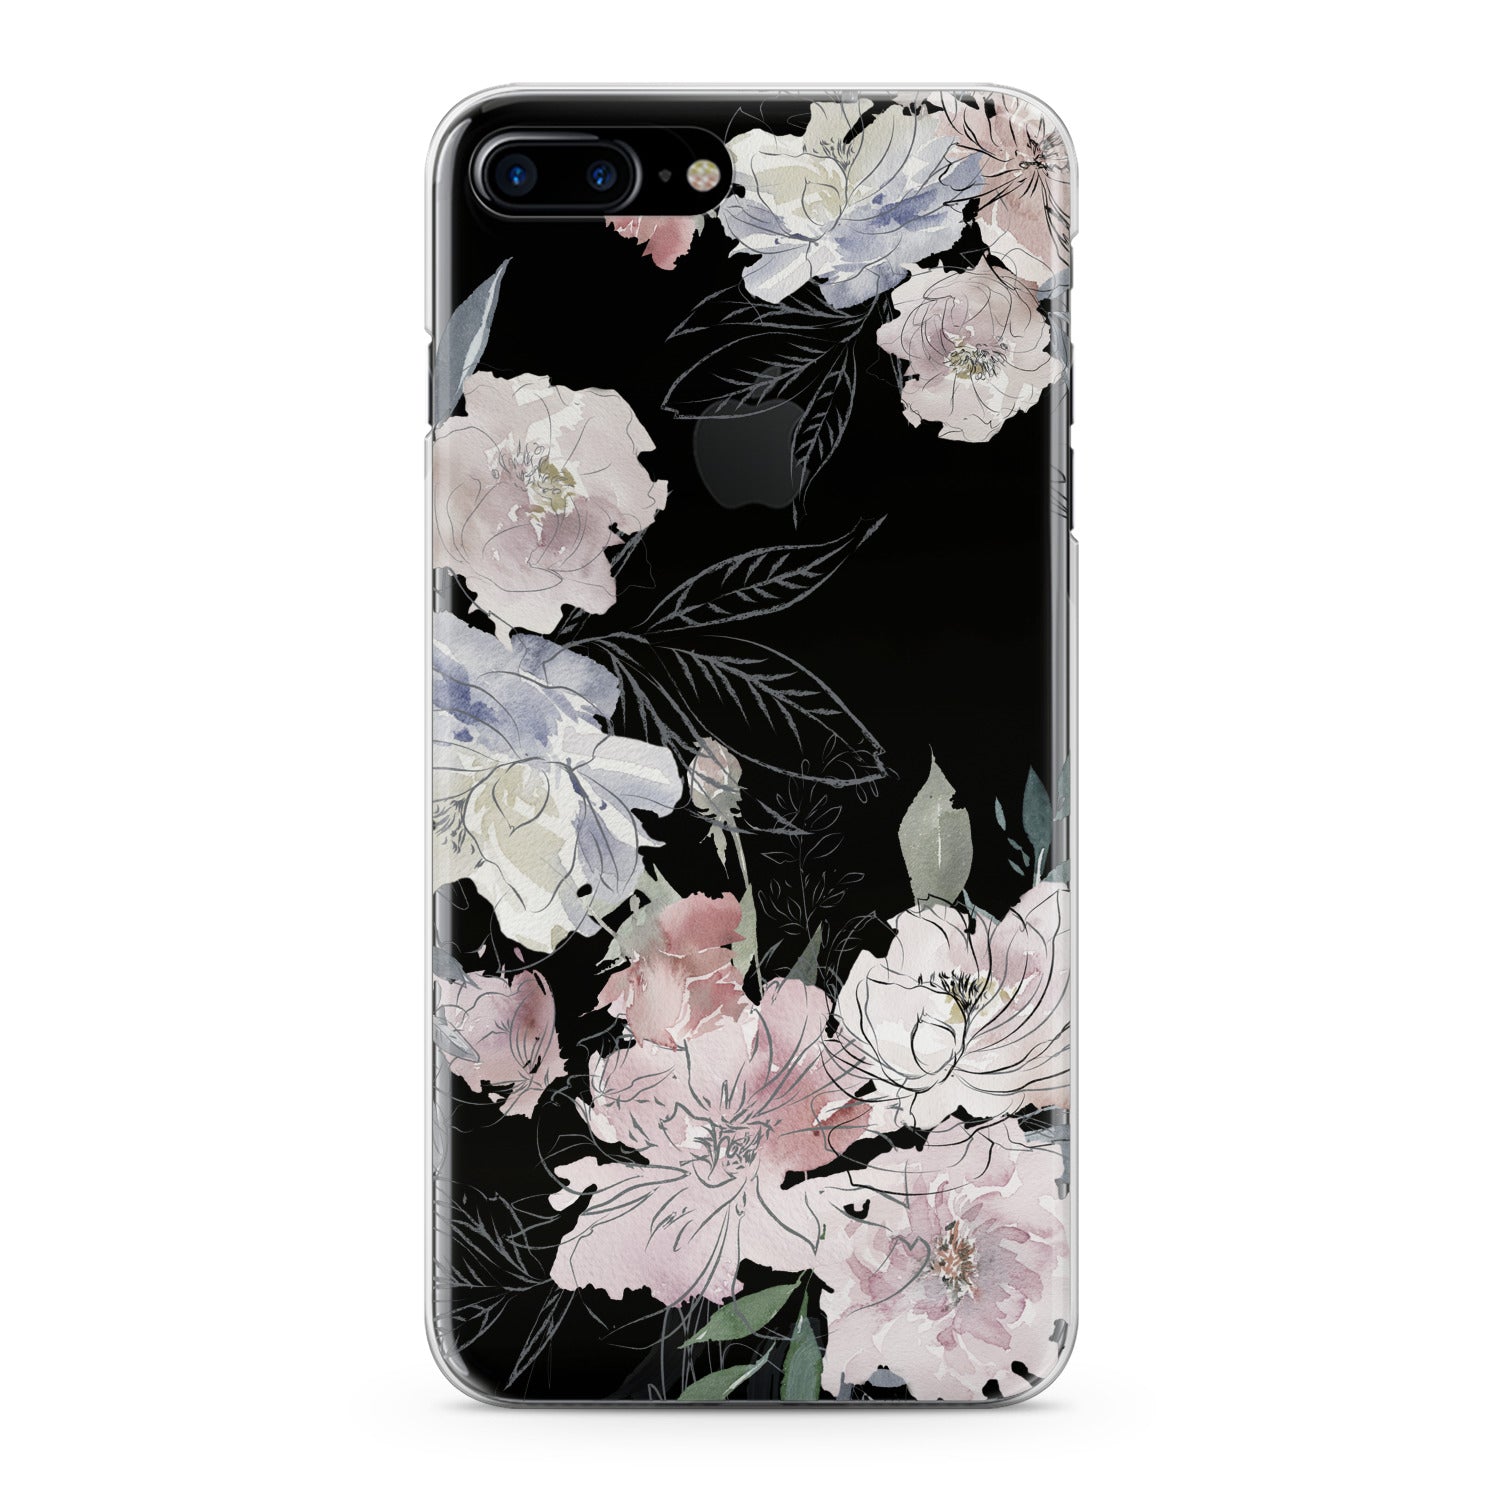 Lex Altern Drawing Flowers Phone Case for your iPhone & Android phone.